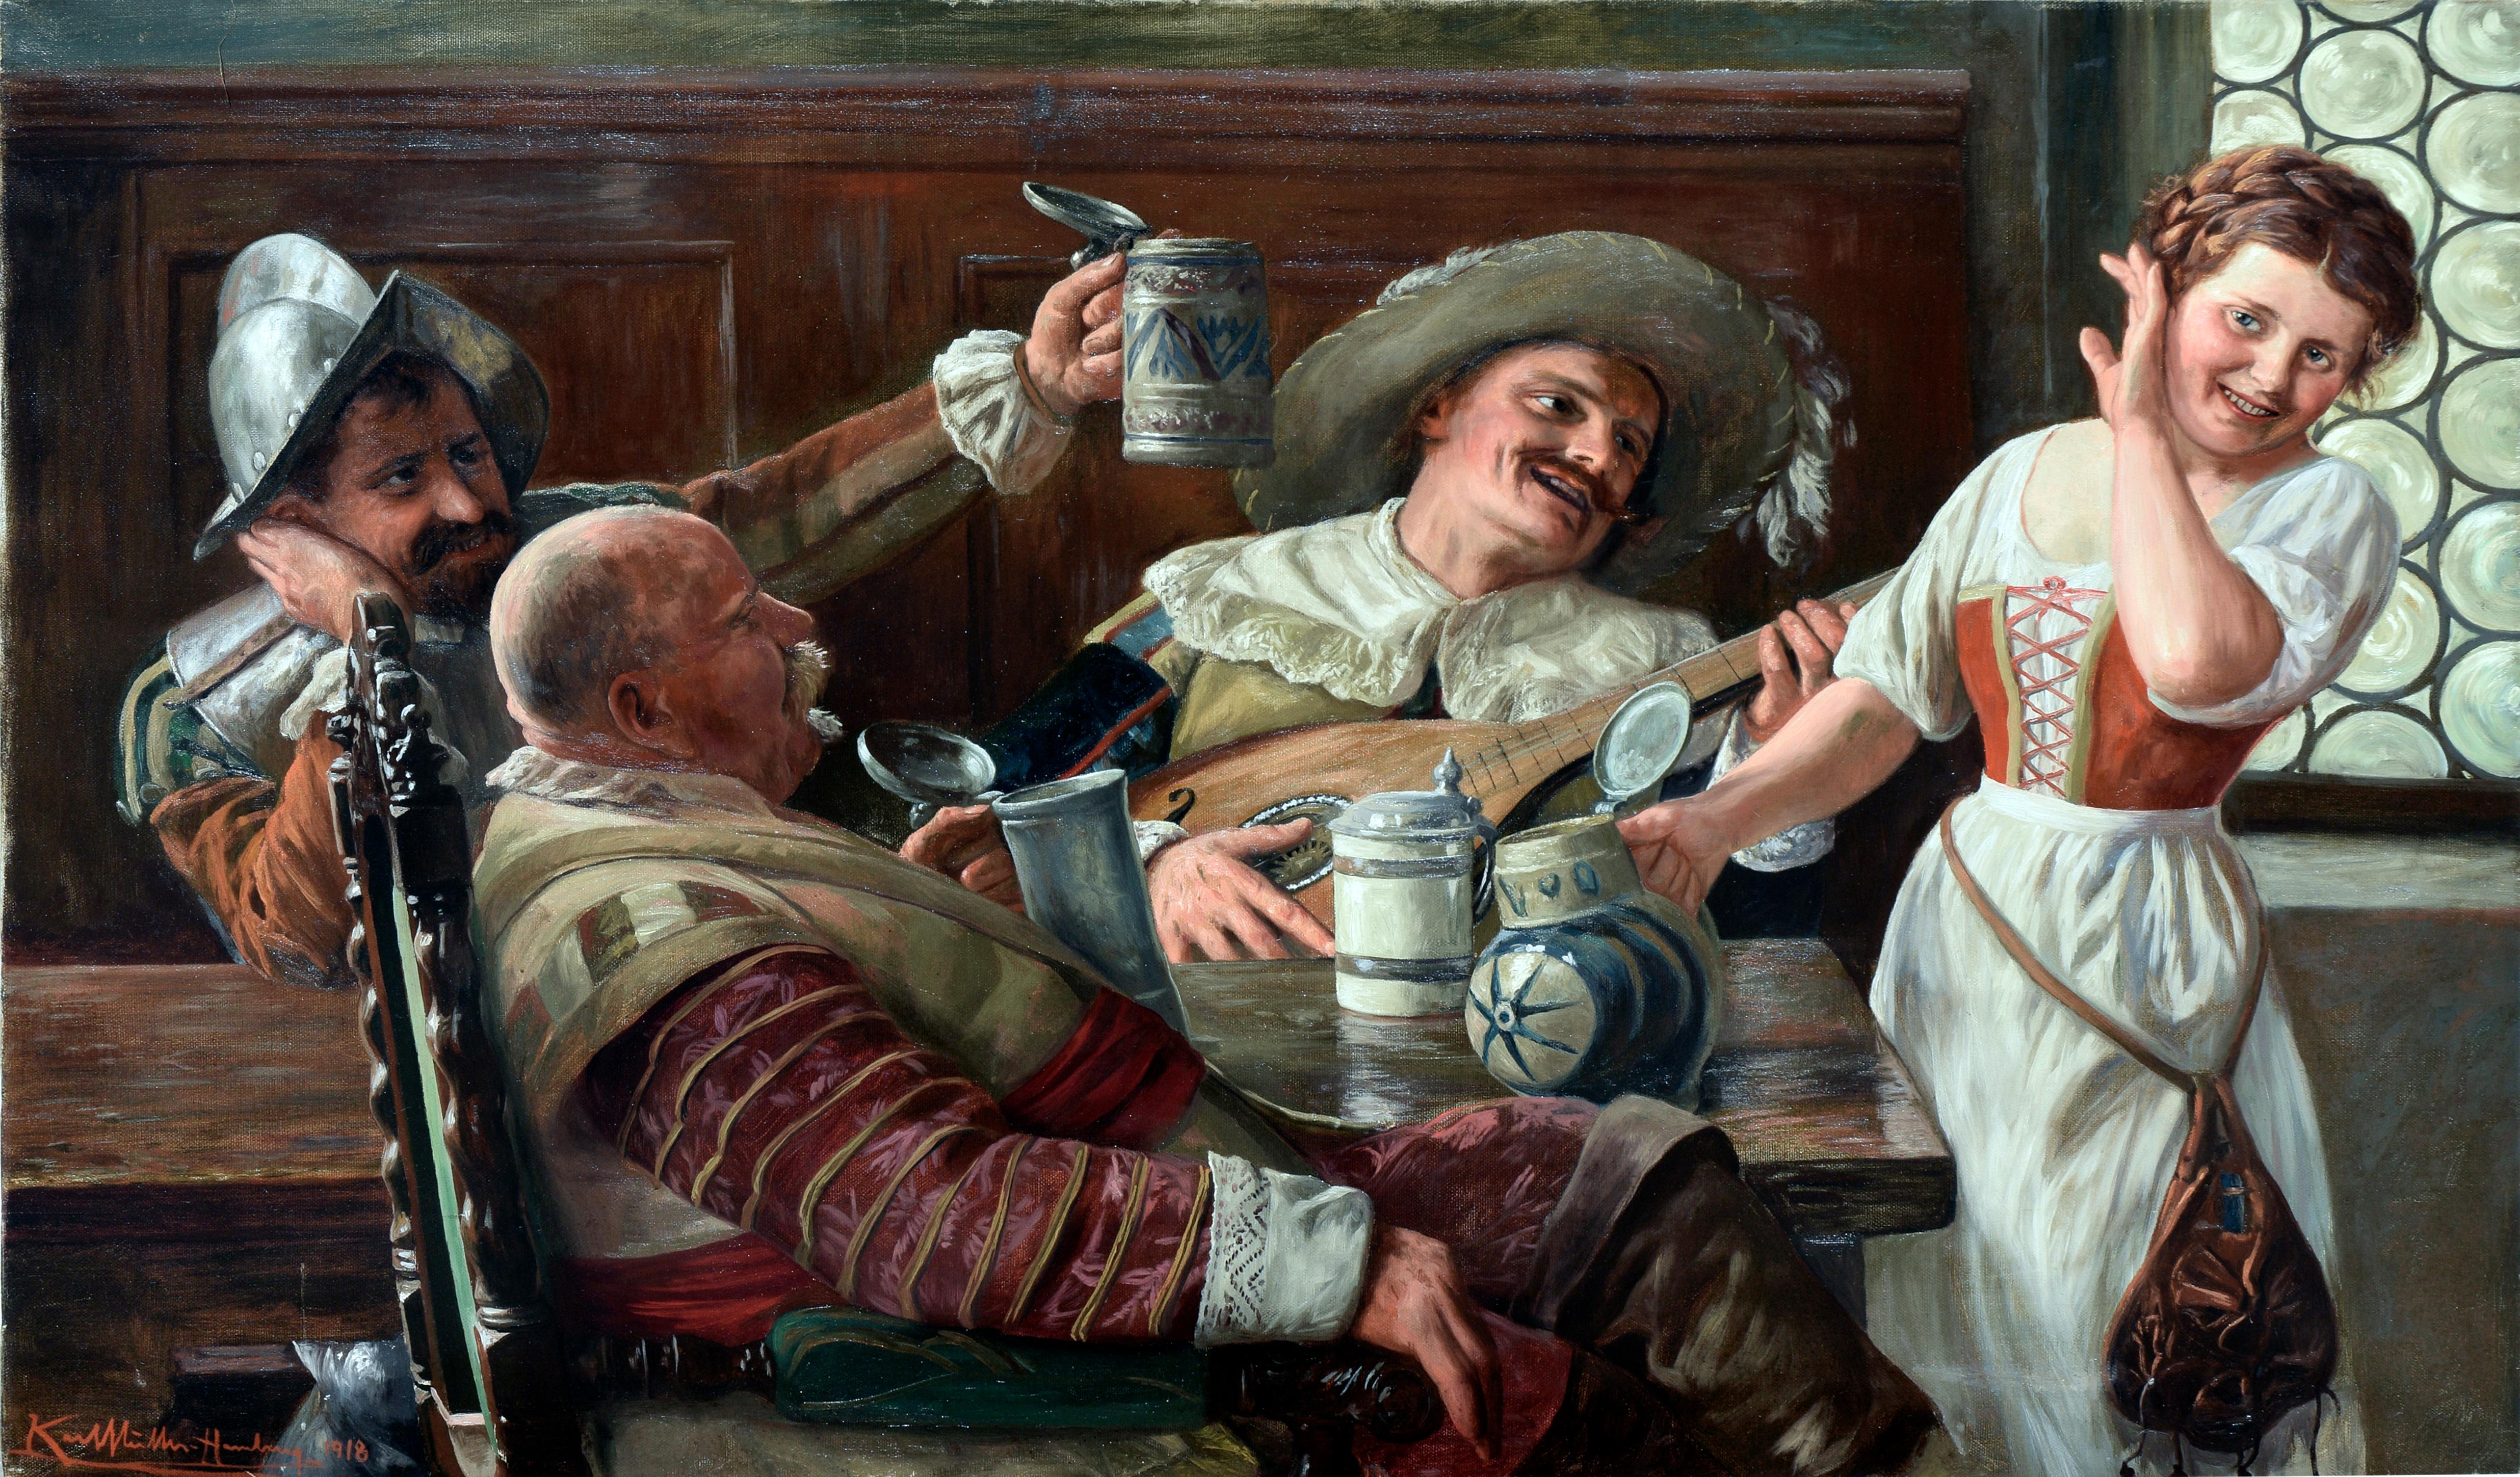 A Jolly Time -- German Genre Tavern Painting, 1918